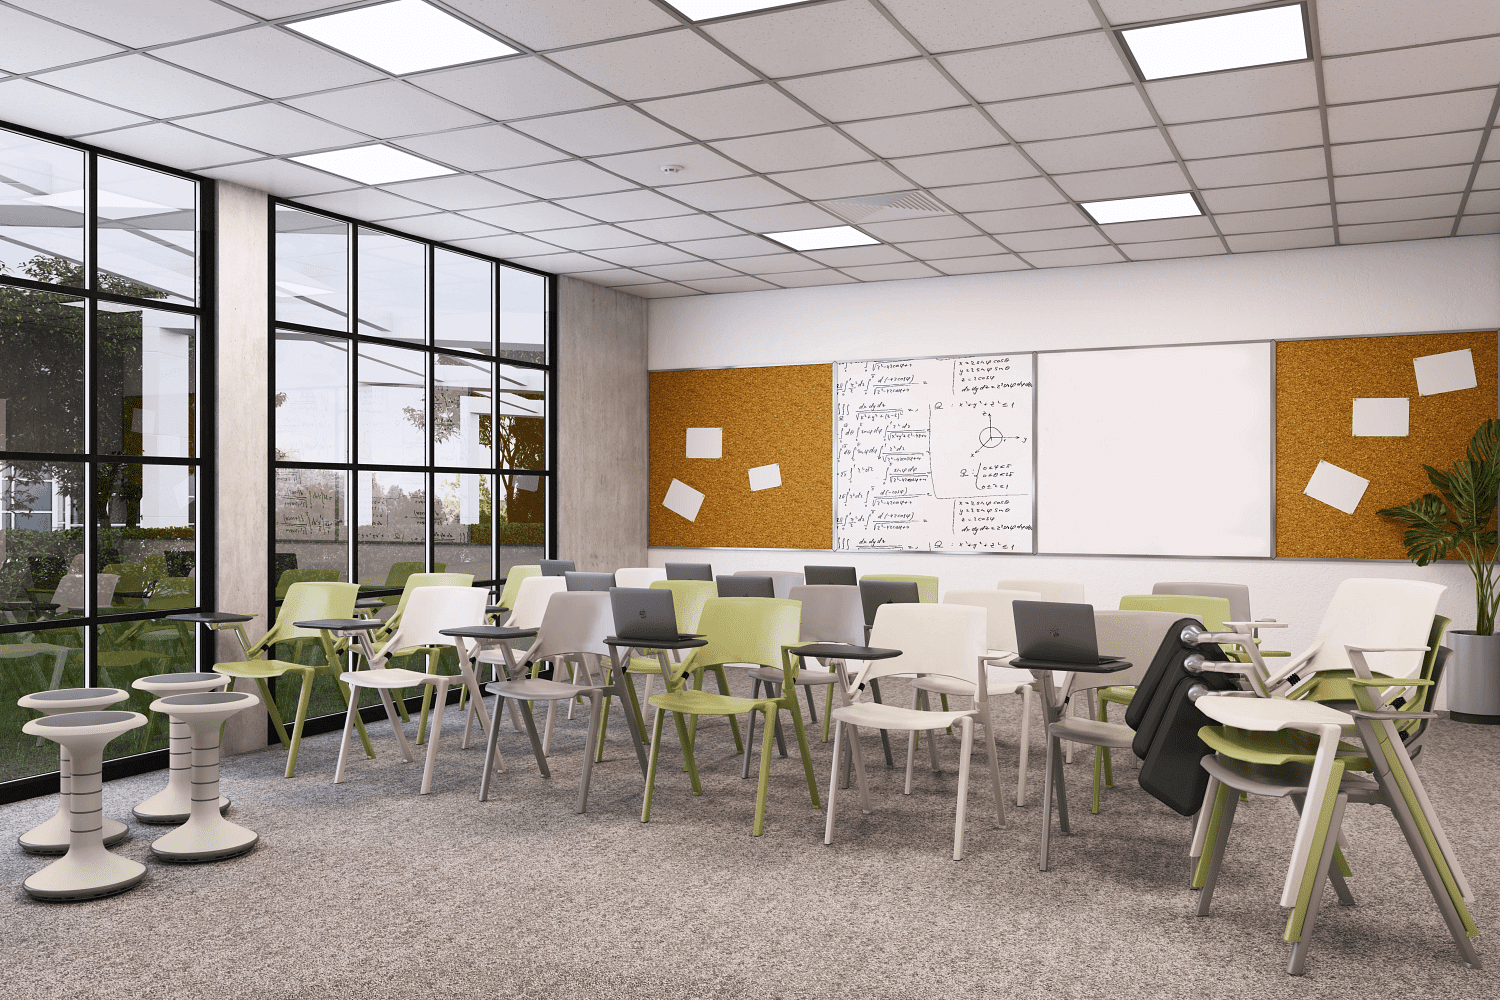 Classroom with modern furniture